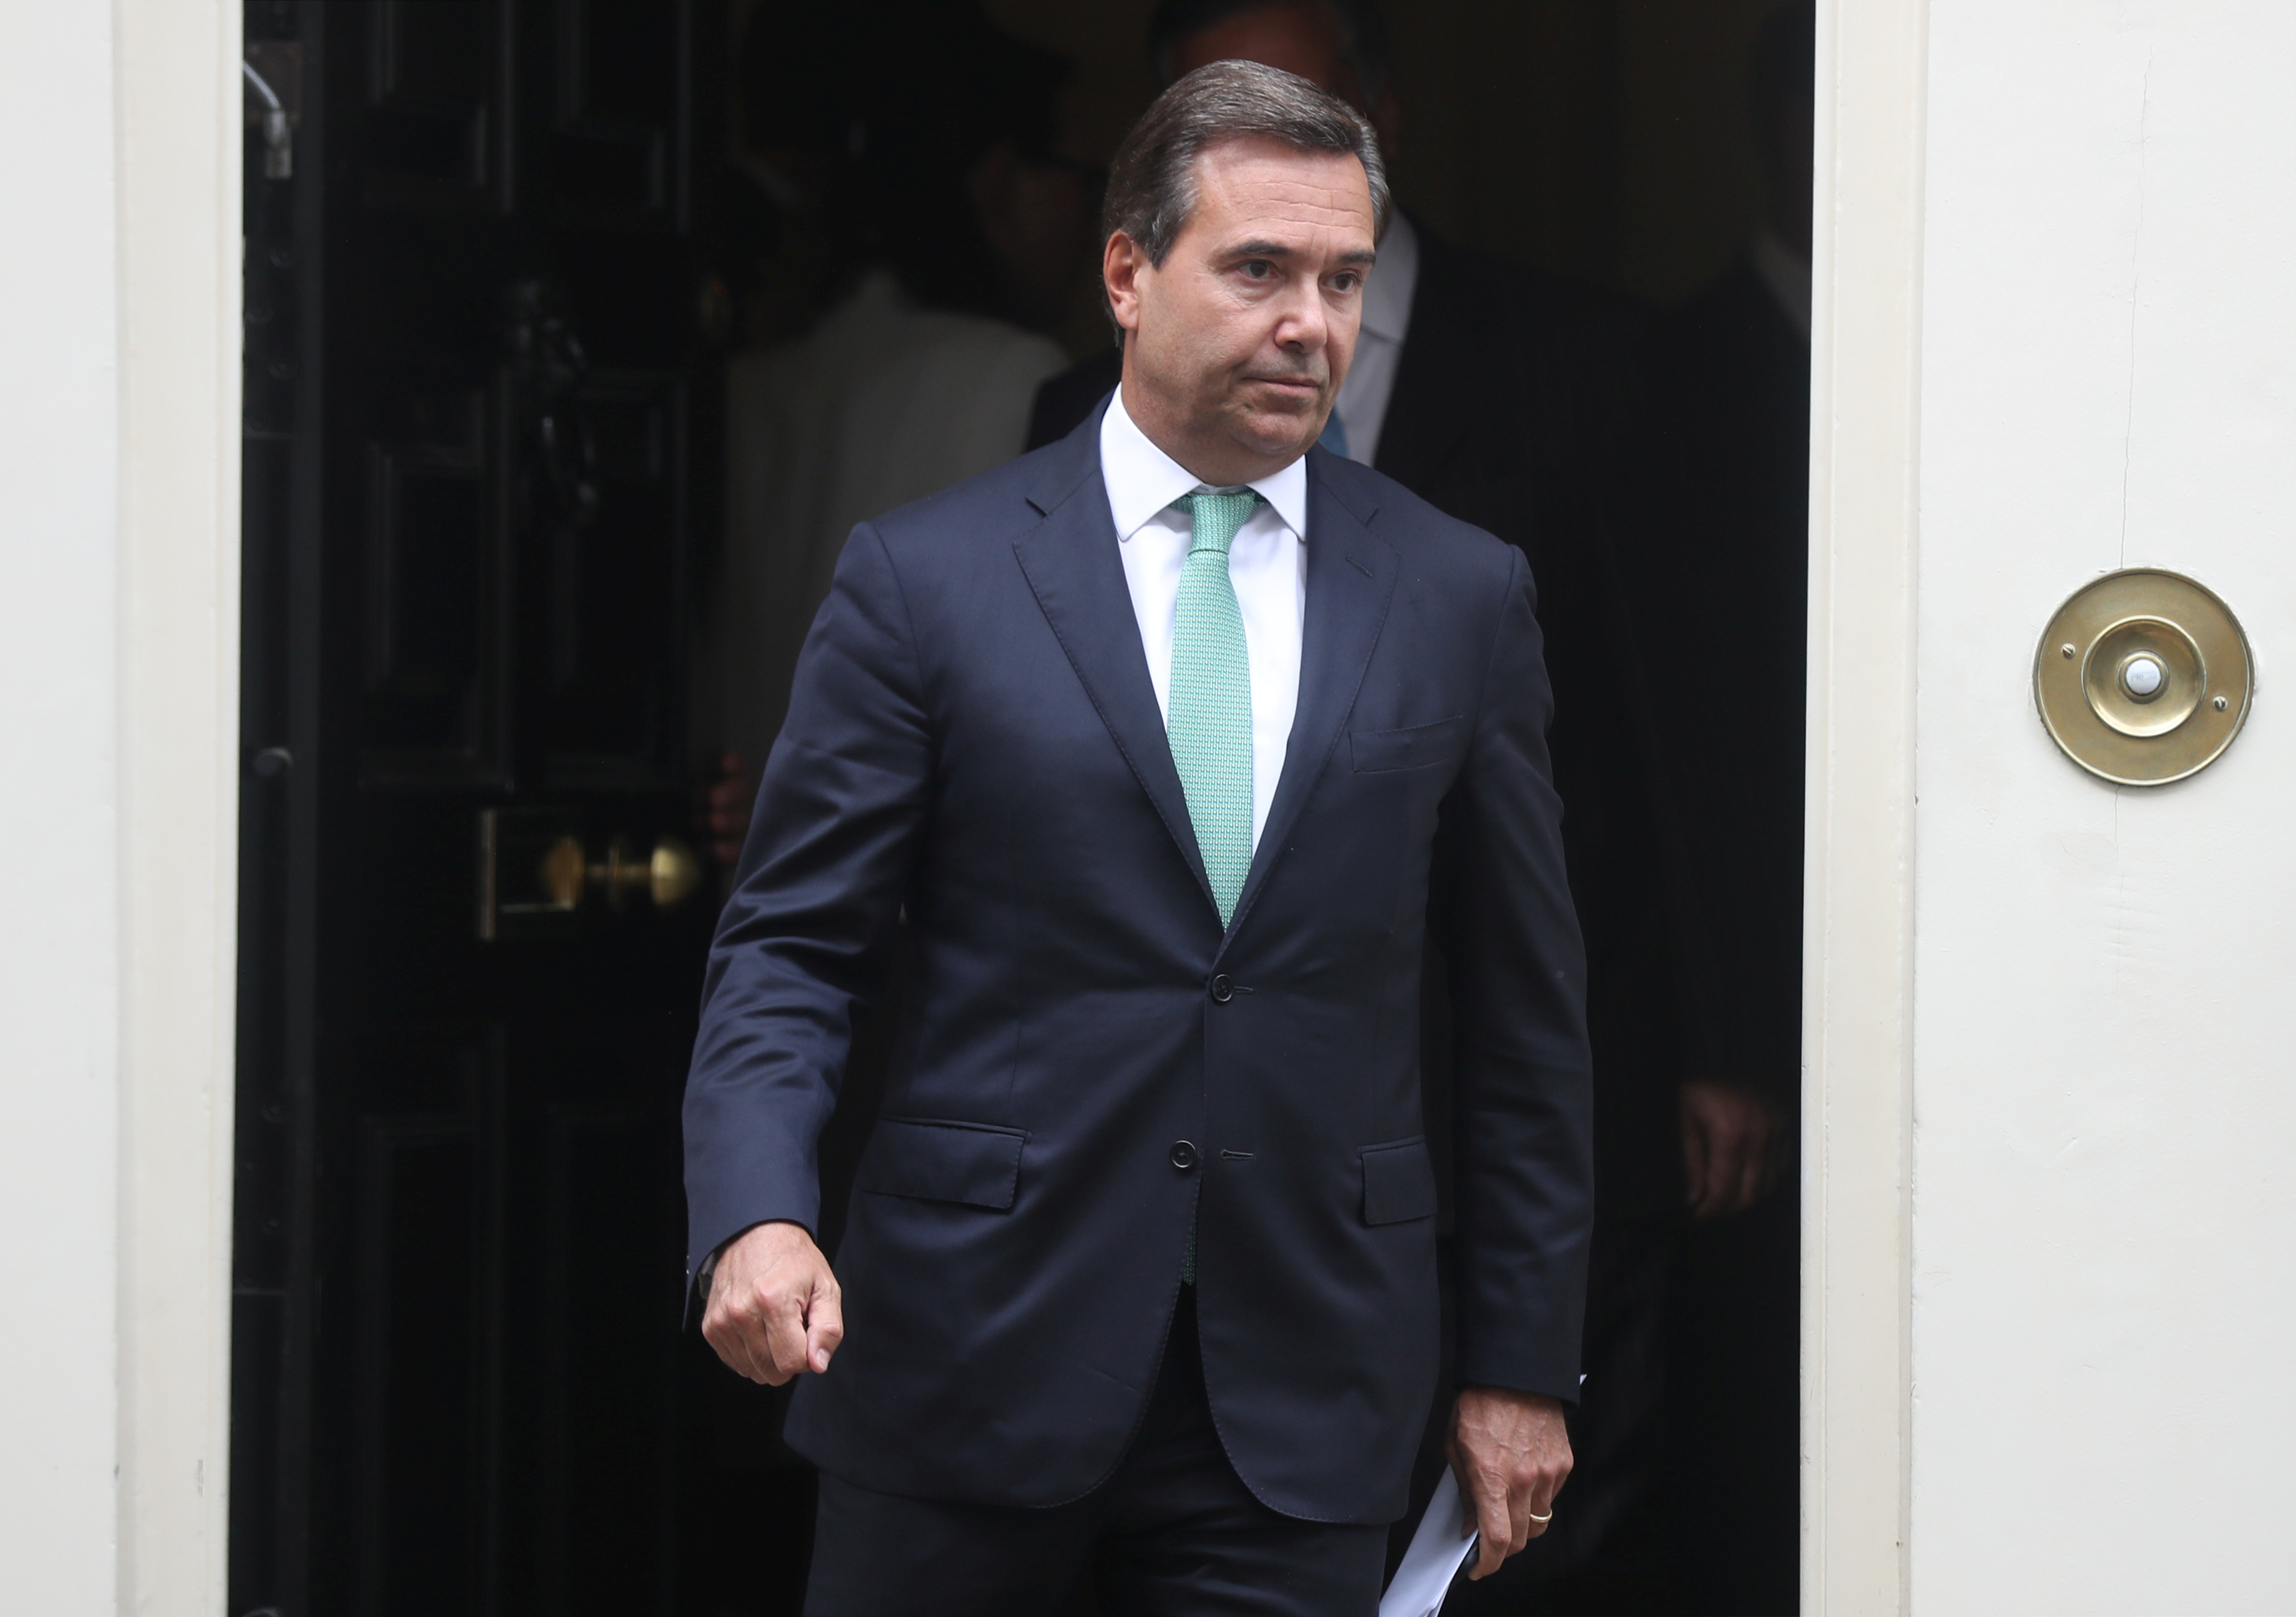 Antonio Horta-Osorio CEO of Lloyds Banking Group leaves Downing Street in London